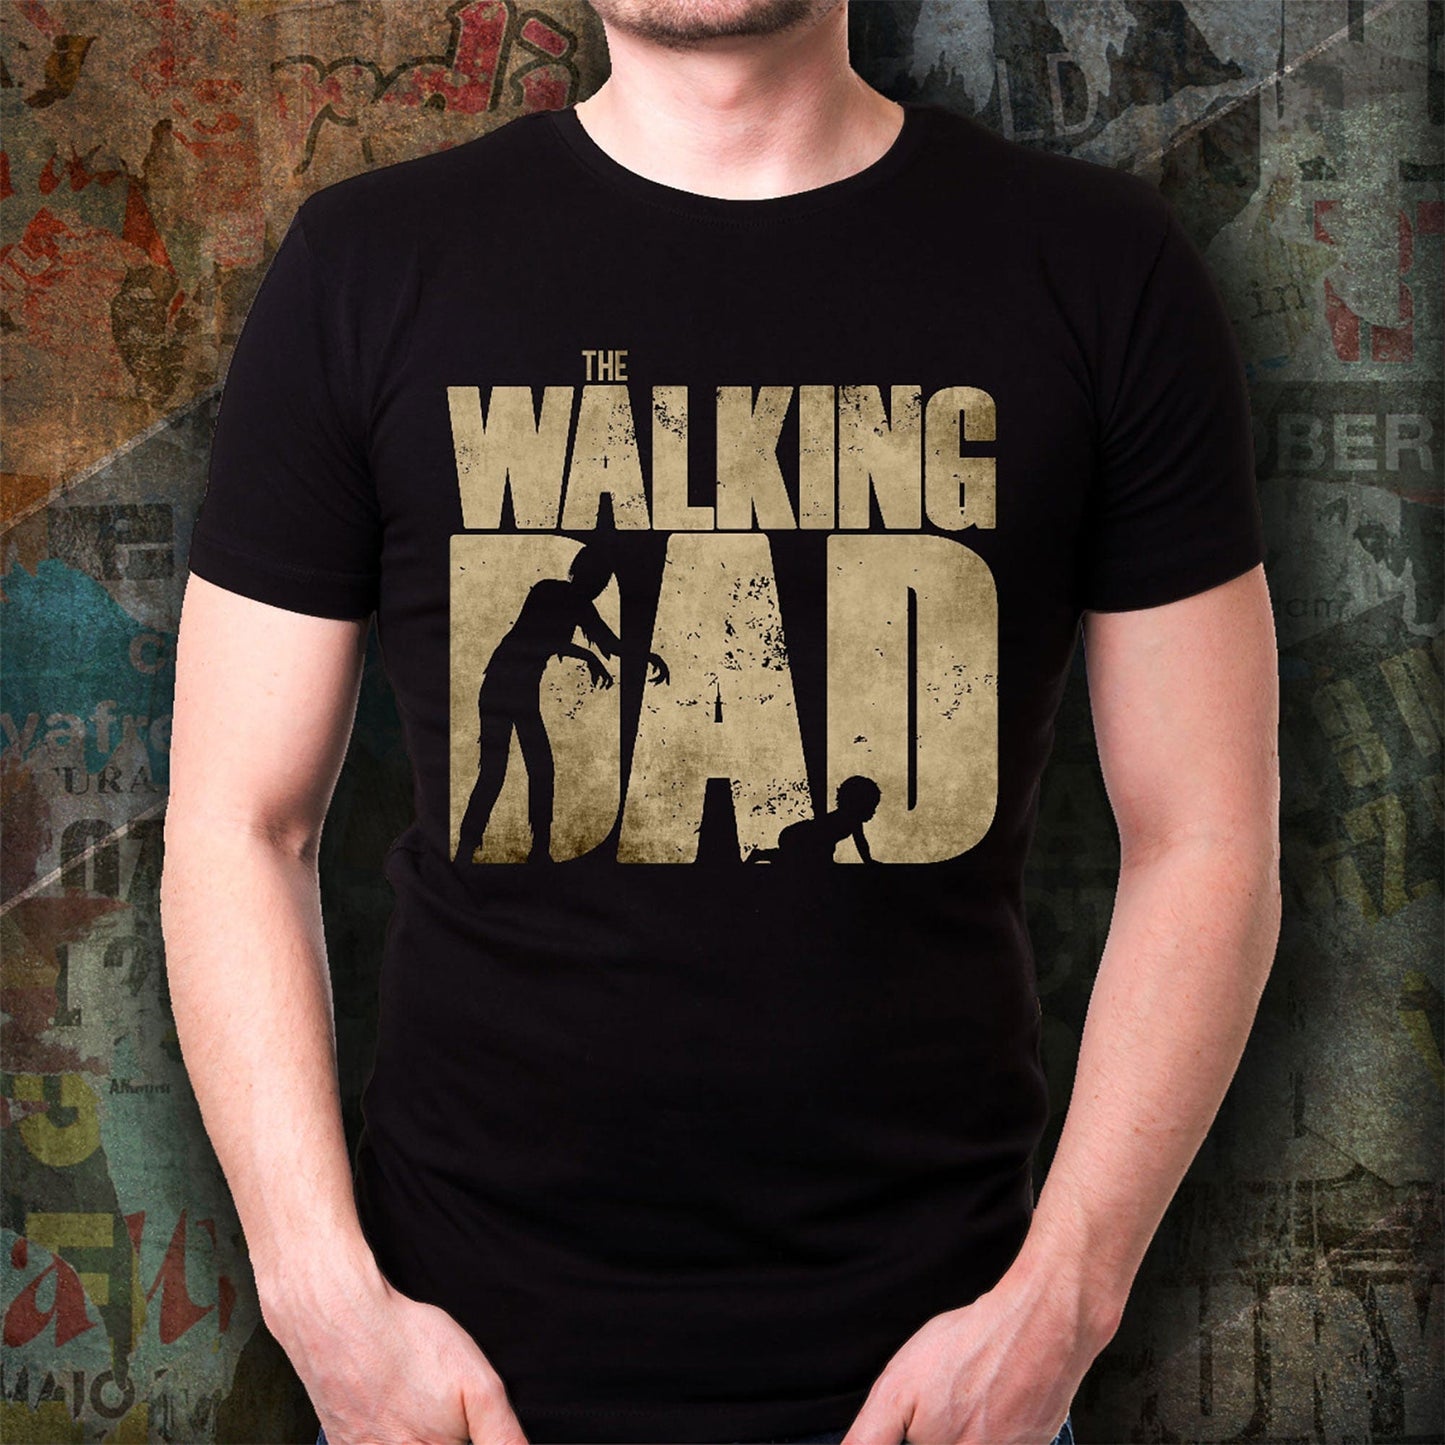 The Walking Dad Funny Dad T-shirts, The Walking Dead Merchandise